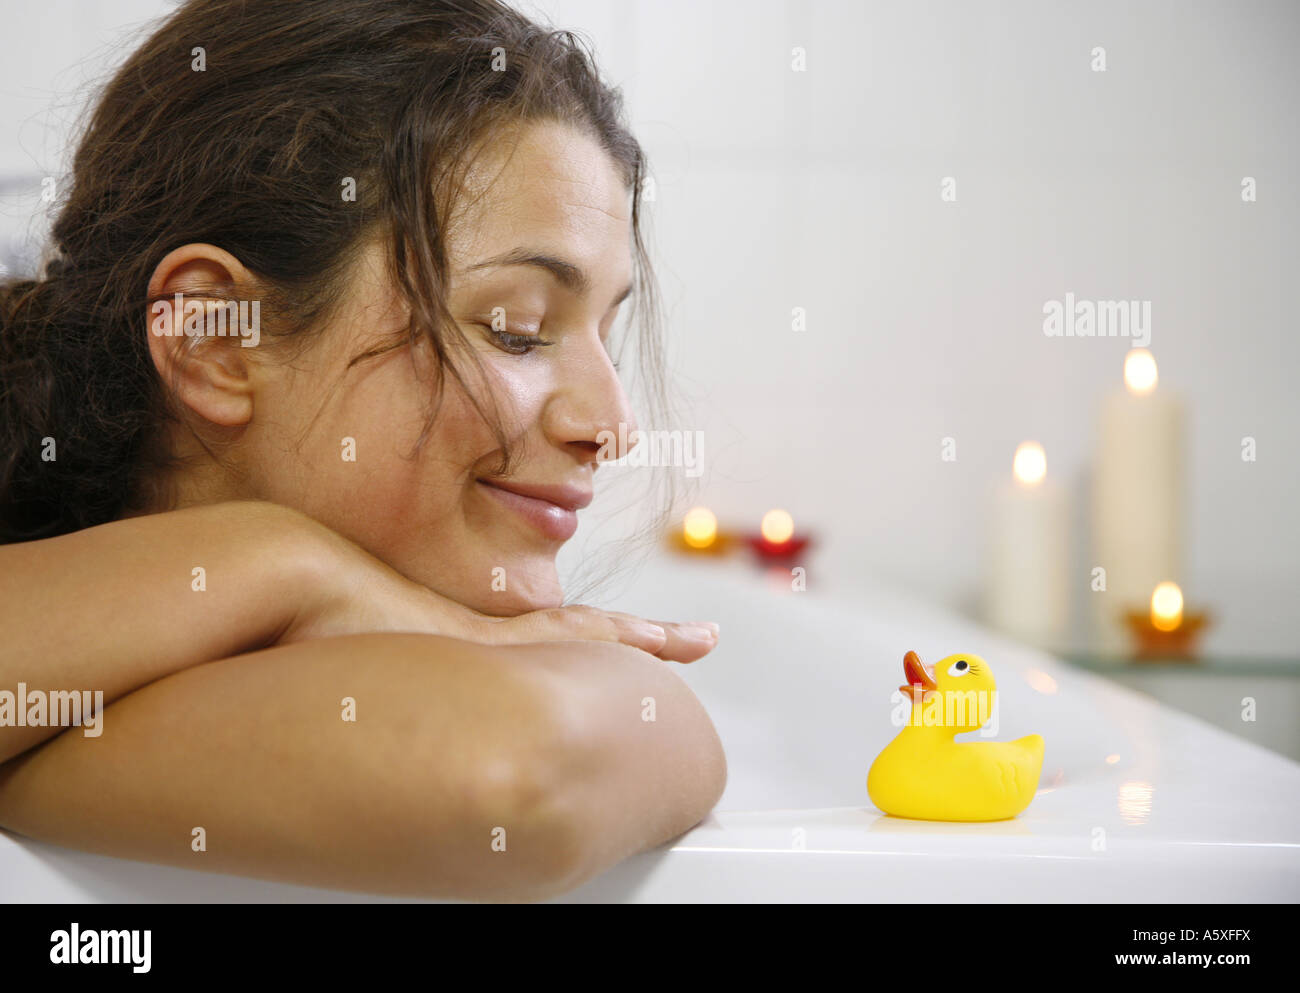 Young woman leaning on bath tub and looking at rubber duck close up portrait Stock Photo